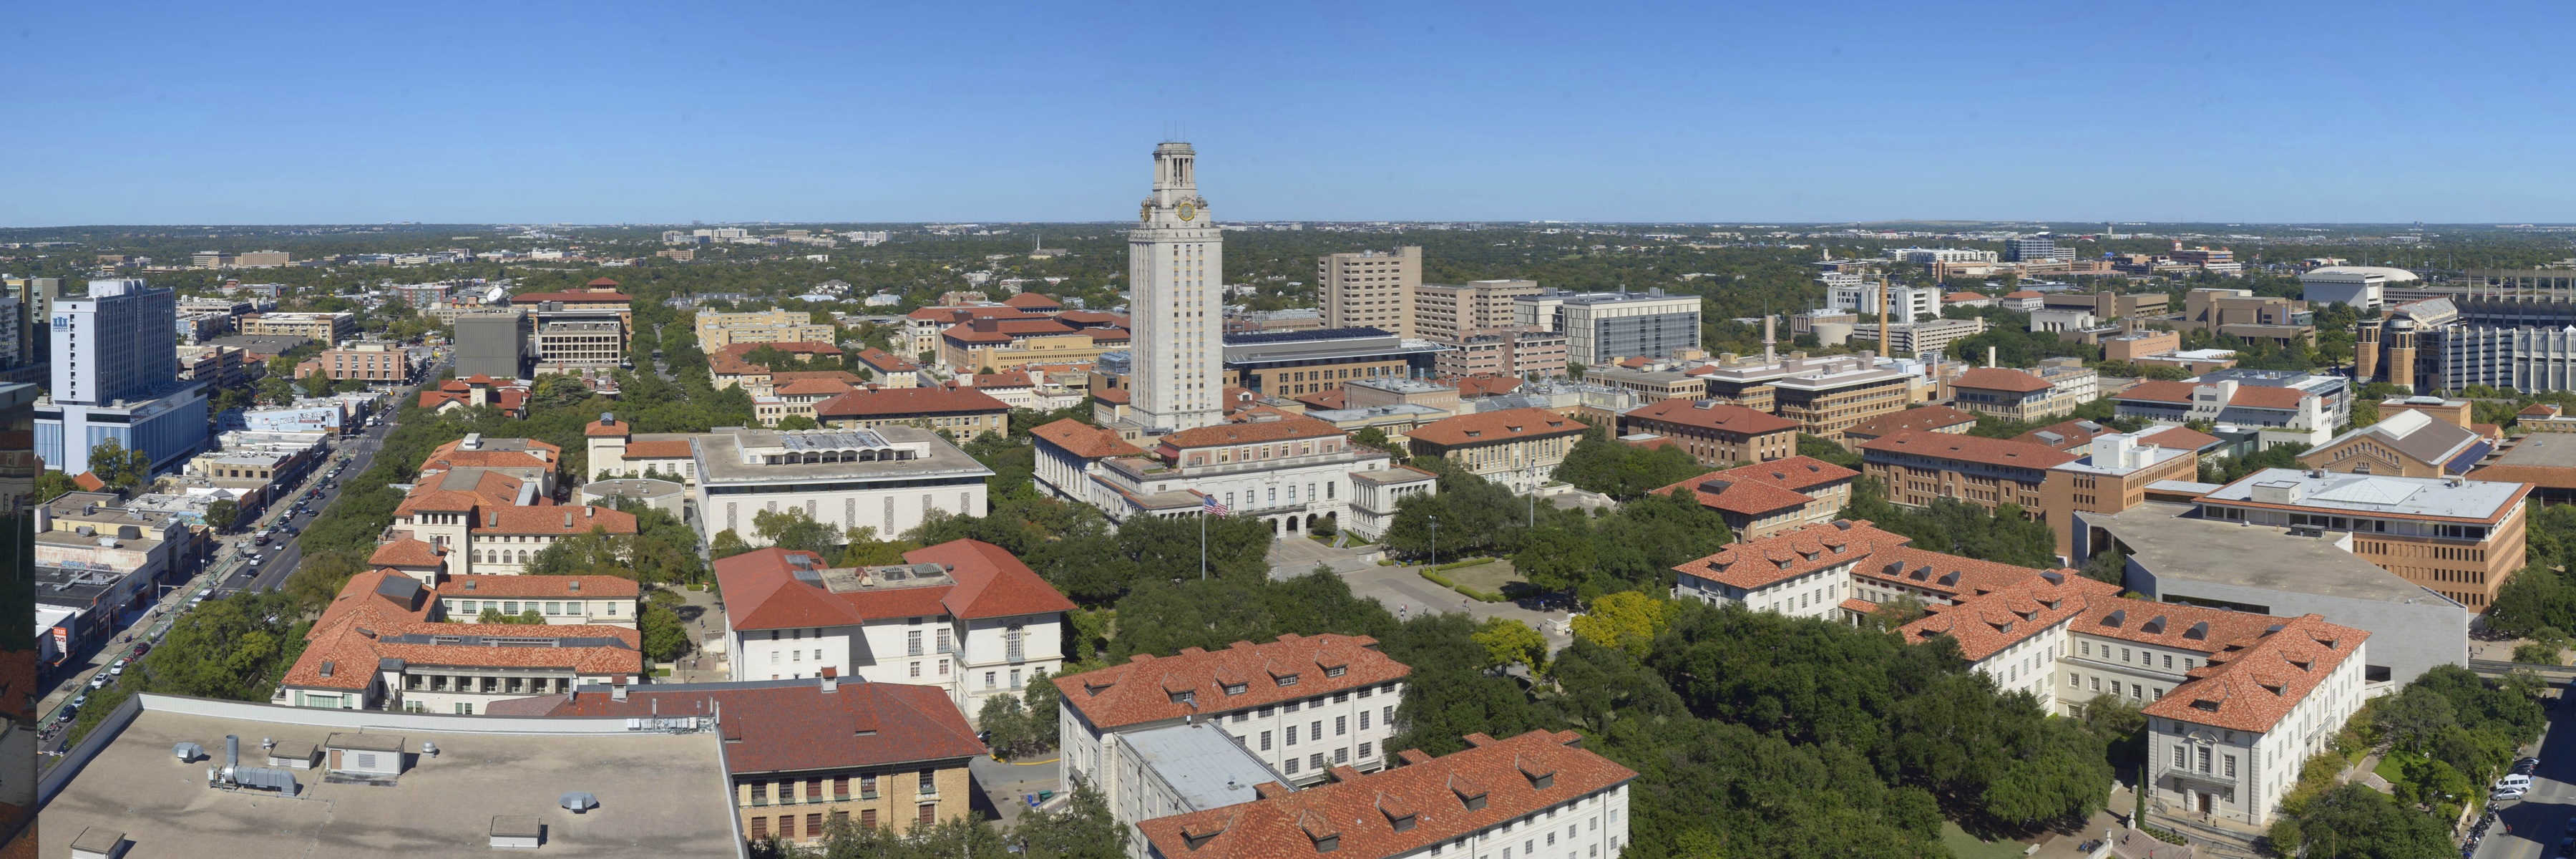 An aerial view of the UT Campus shows the Tower, the six-pack and buildings and greenery across the Forty Acres.